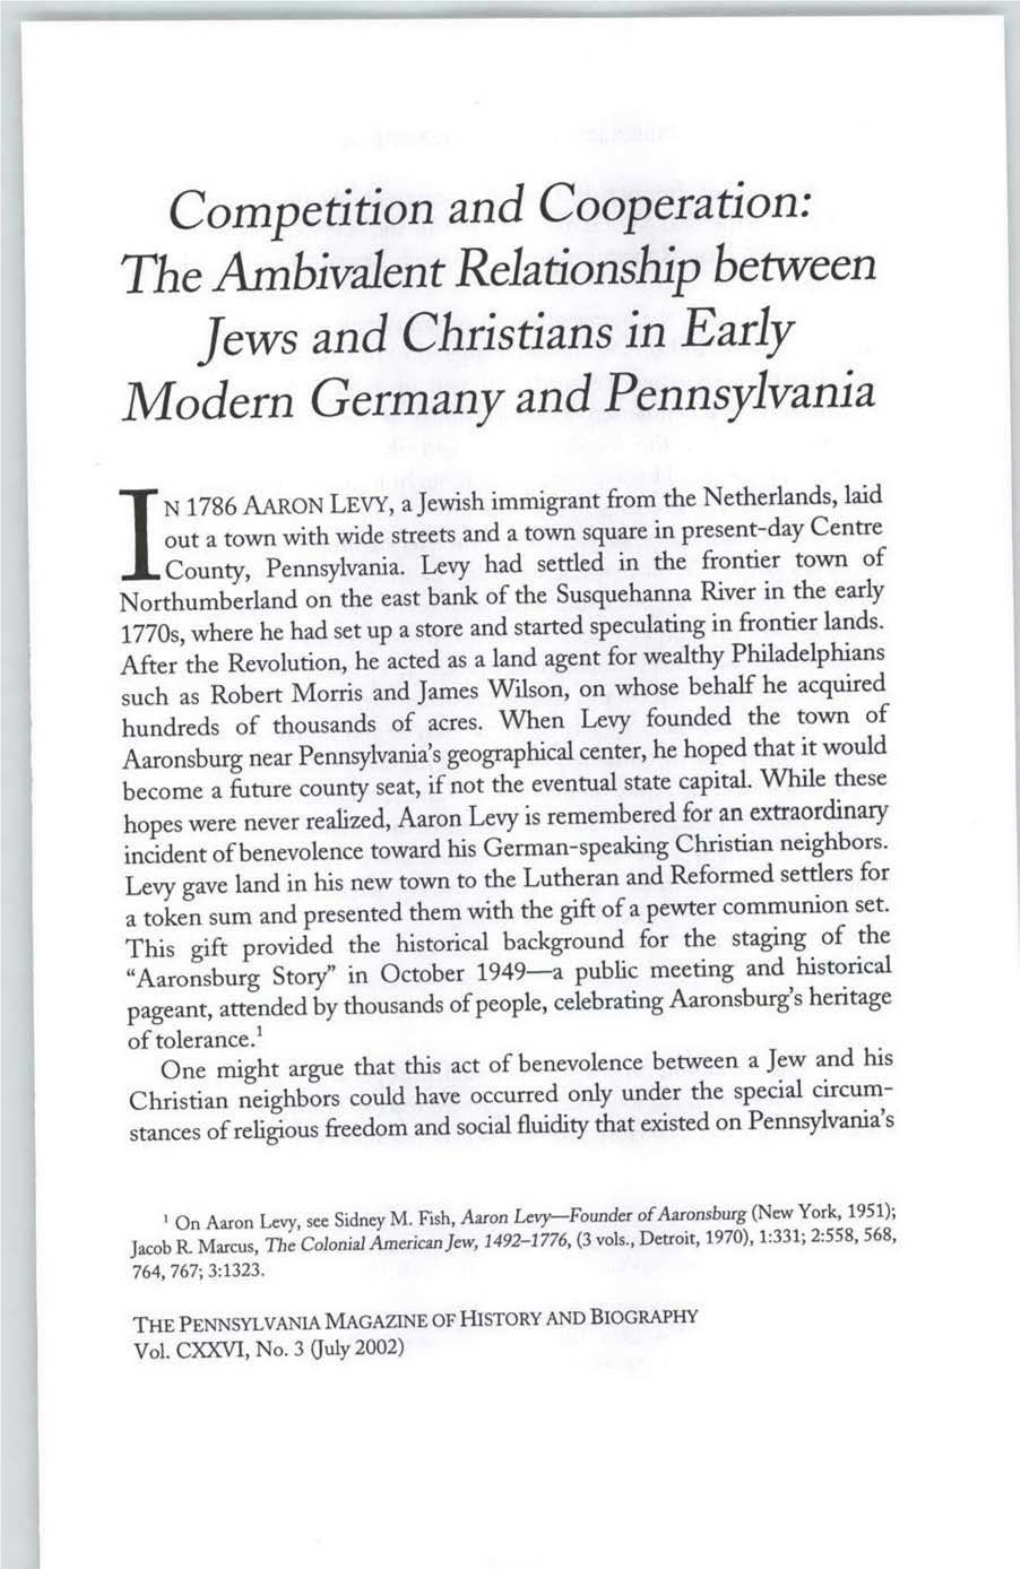 The Ambivalent Relationship Between Jews and Christians in Early Modern Germany and Pennsylvania